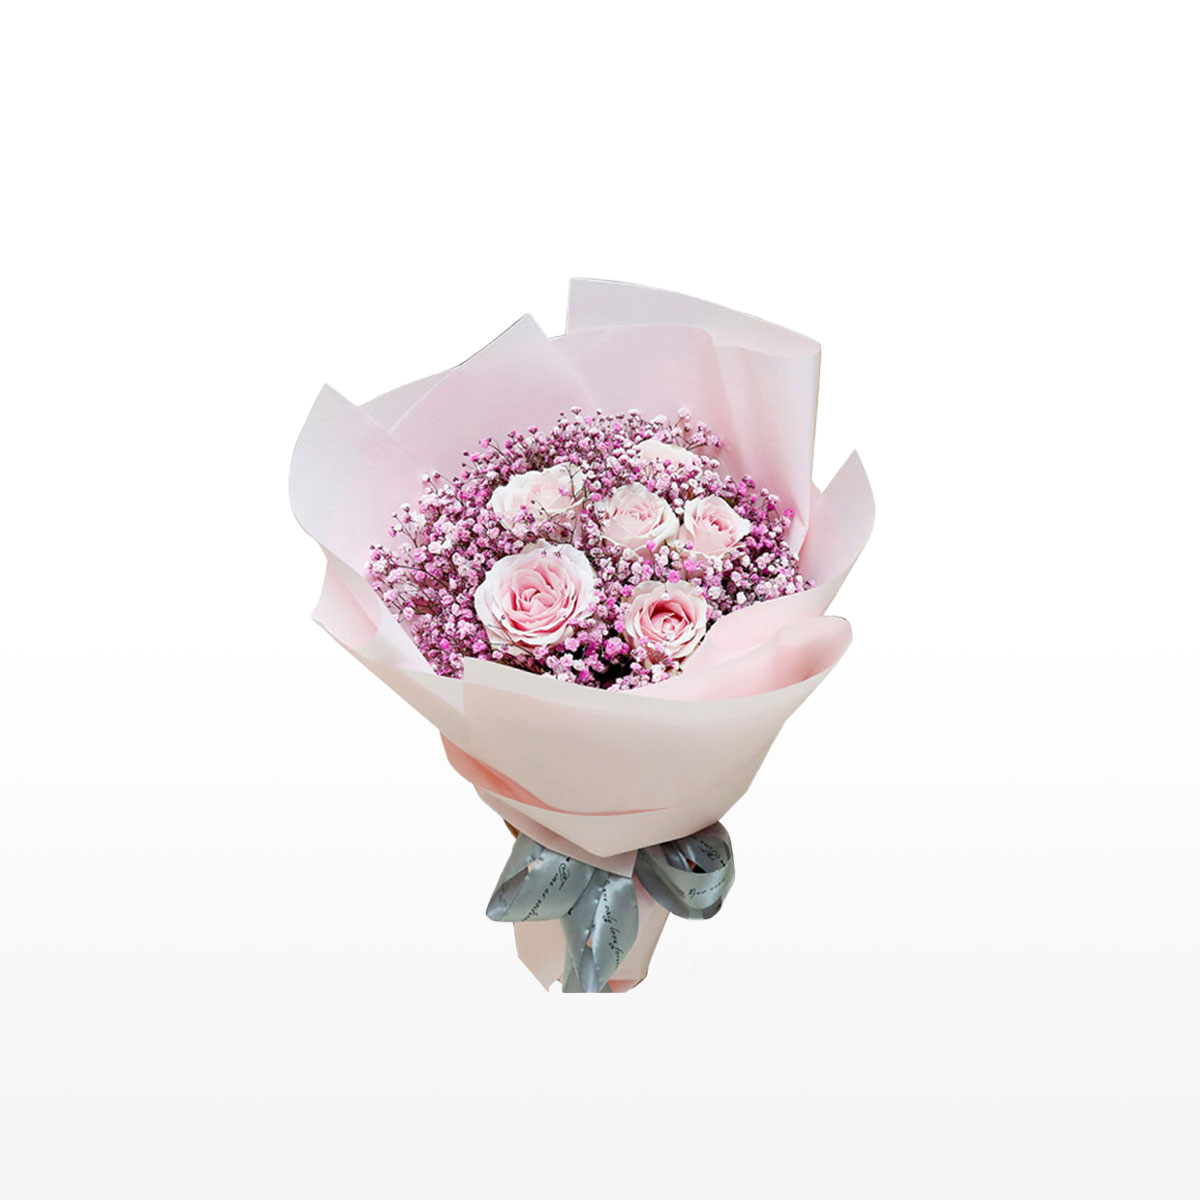 Medium bouquet of 6 pink roses and baby's breath flowers wrapped in quality matte paper